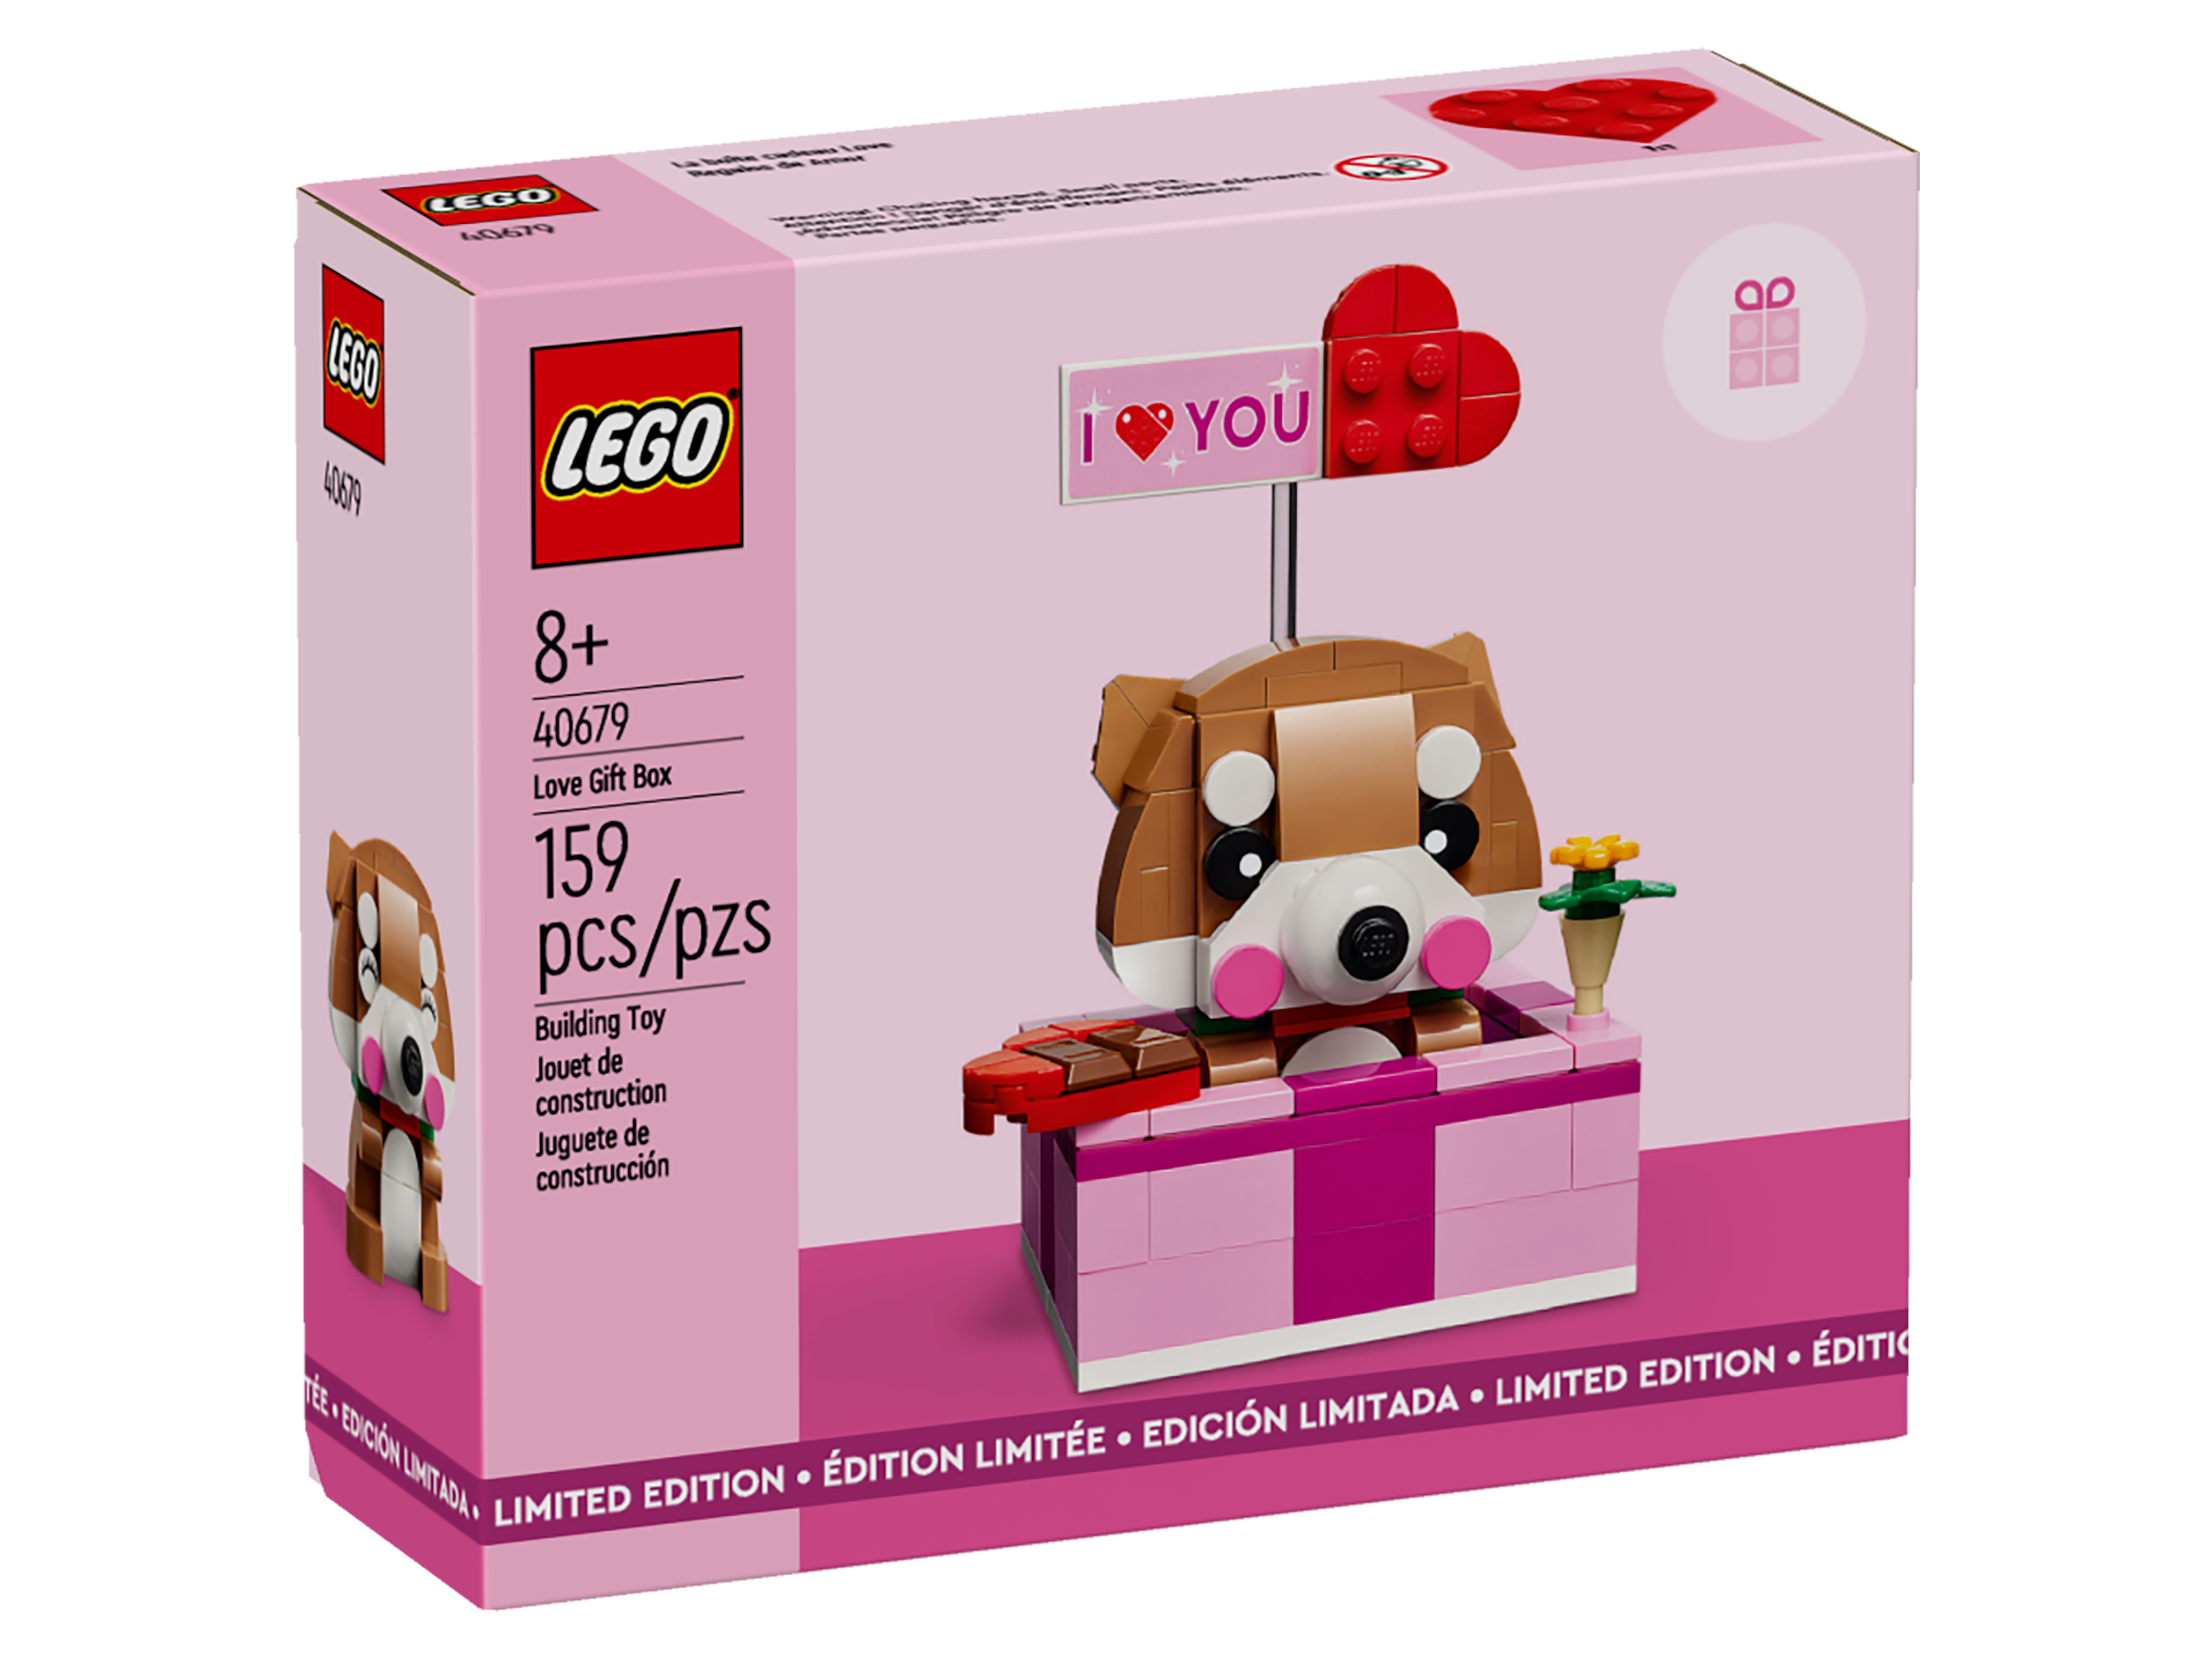 Love Gift Box 40679 | Other | Buy online at the Official LEGO® Shop US